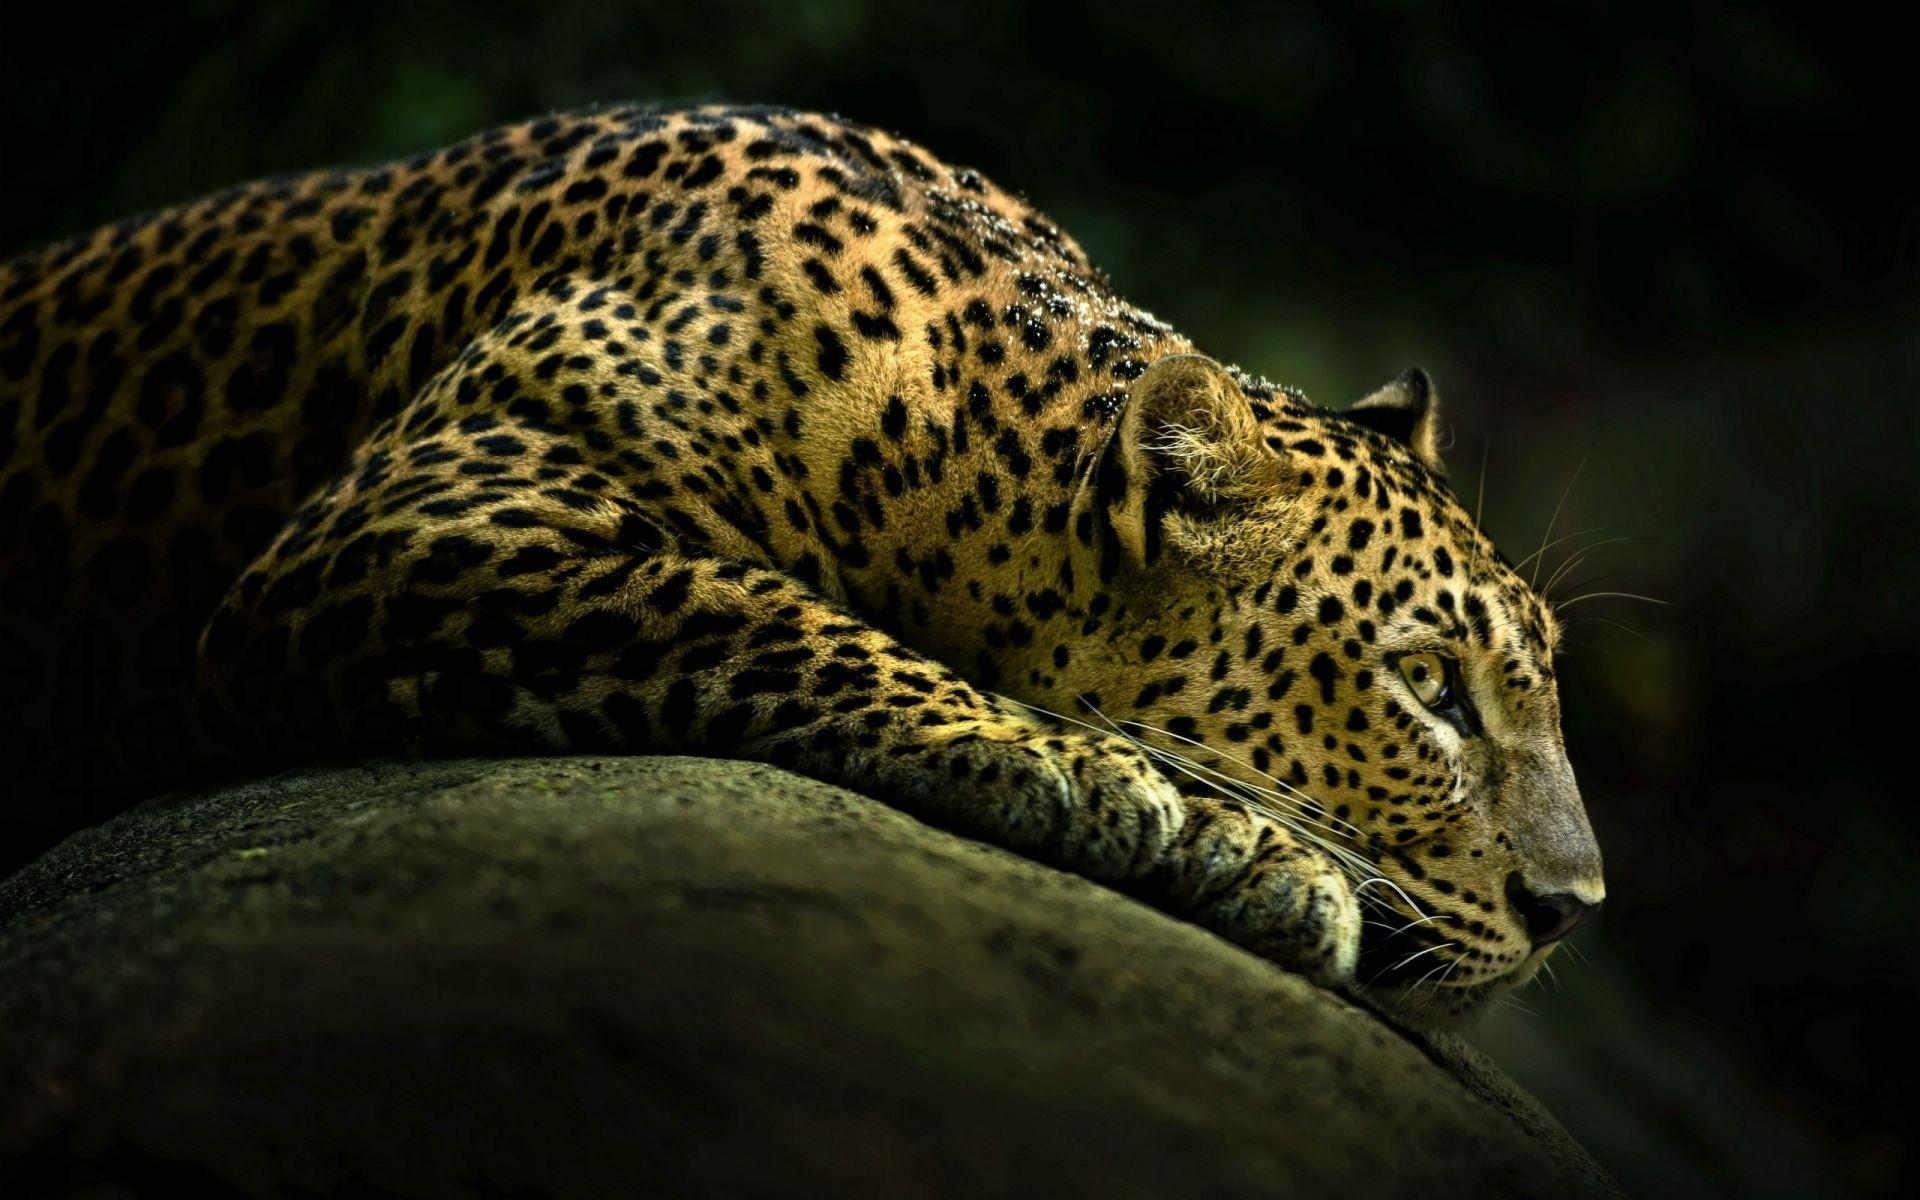 Lazy Cheetah Wallpaper. HD Animals and Birds Wallpaper for Mobile